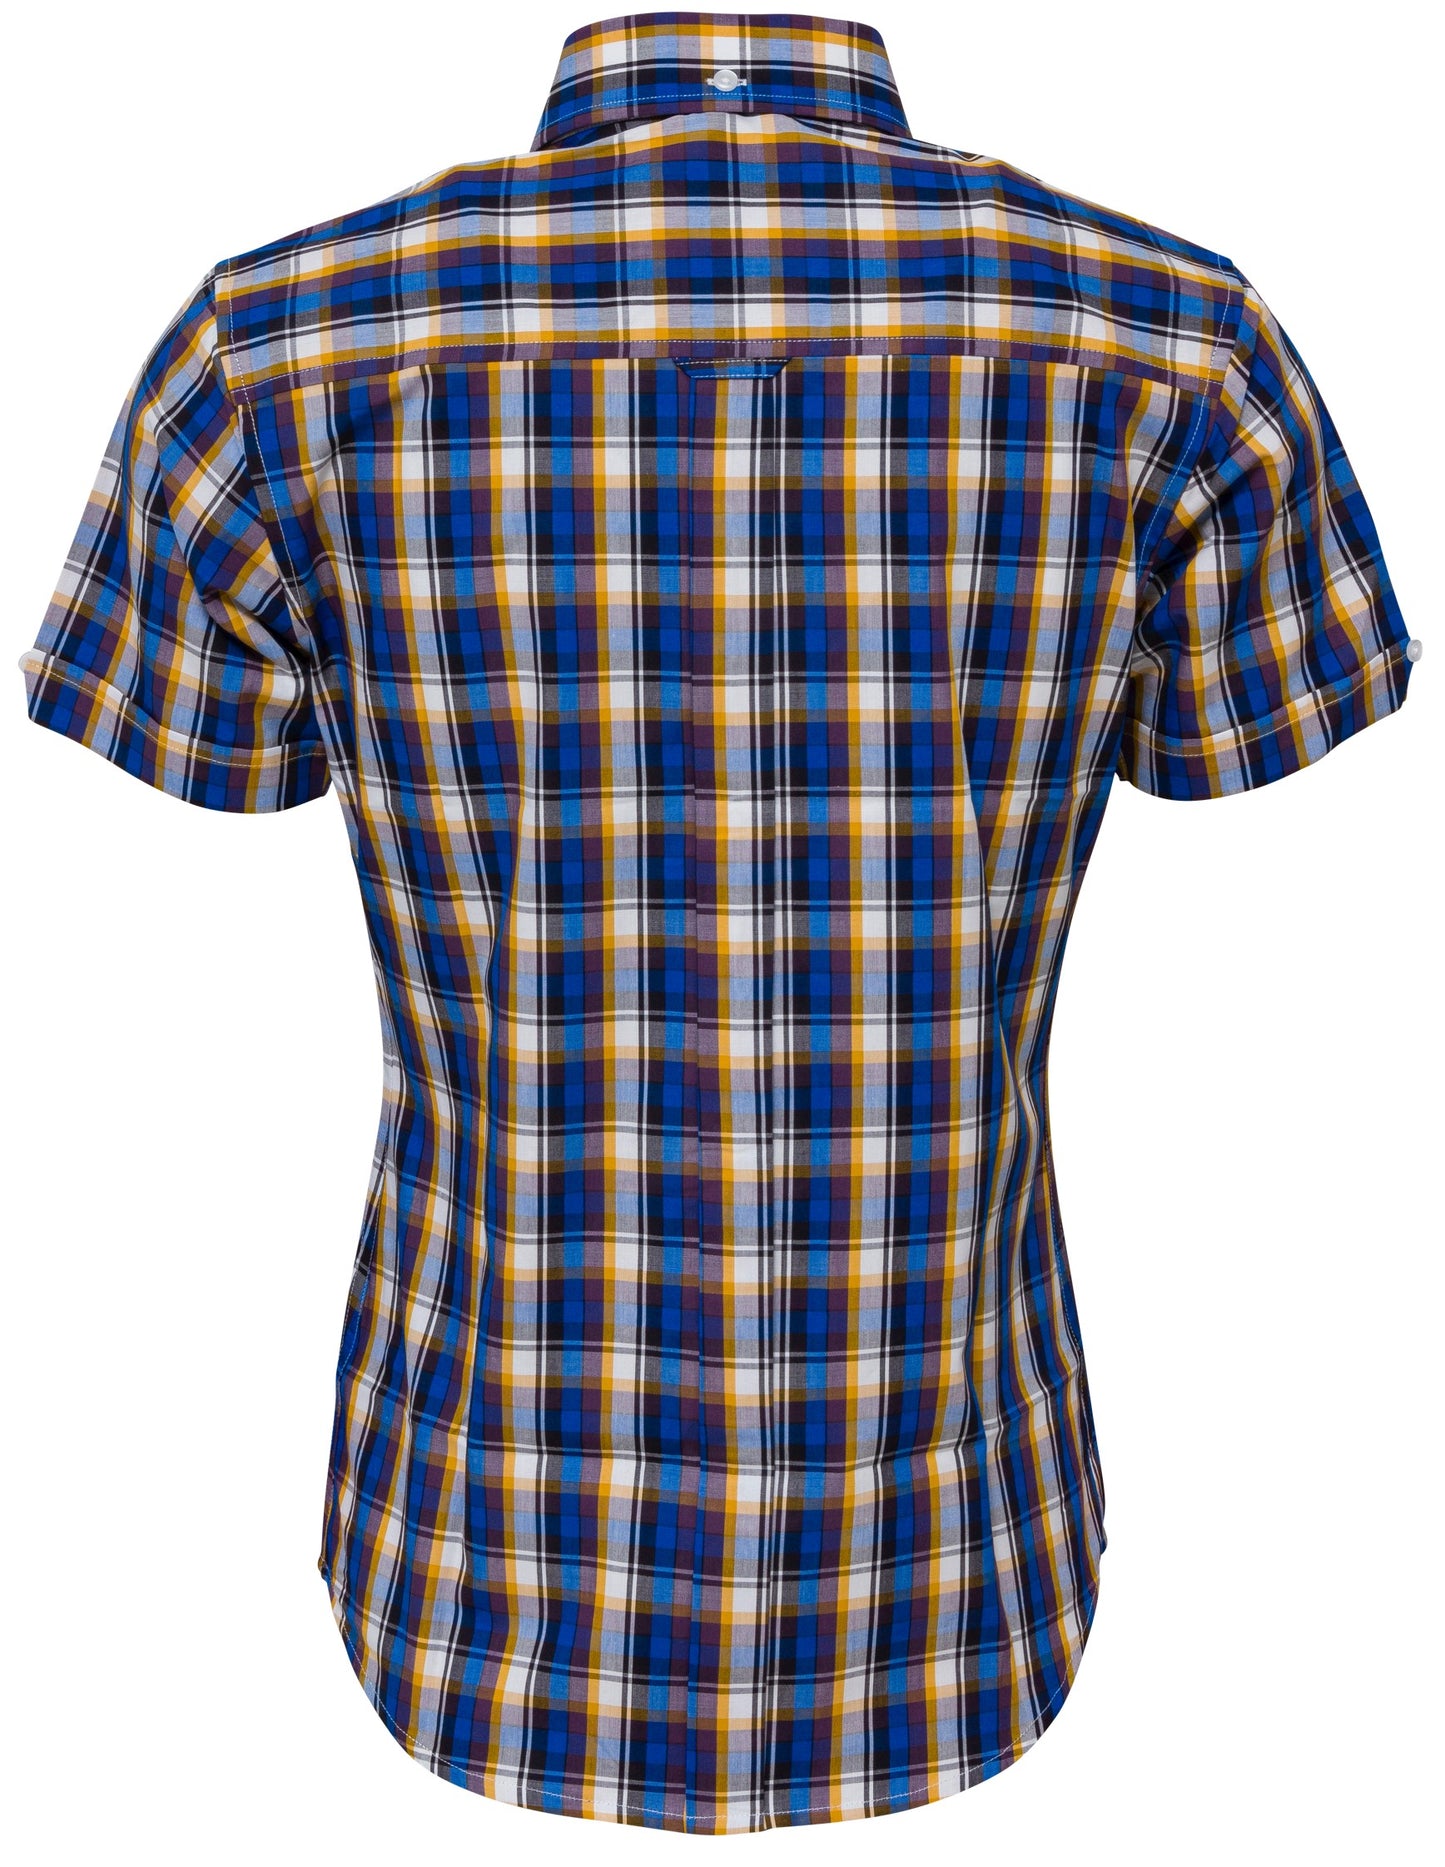 Relco Ladies Retro Blue Check Button Down Short Sleeved Shirts